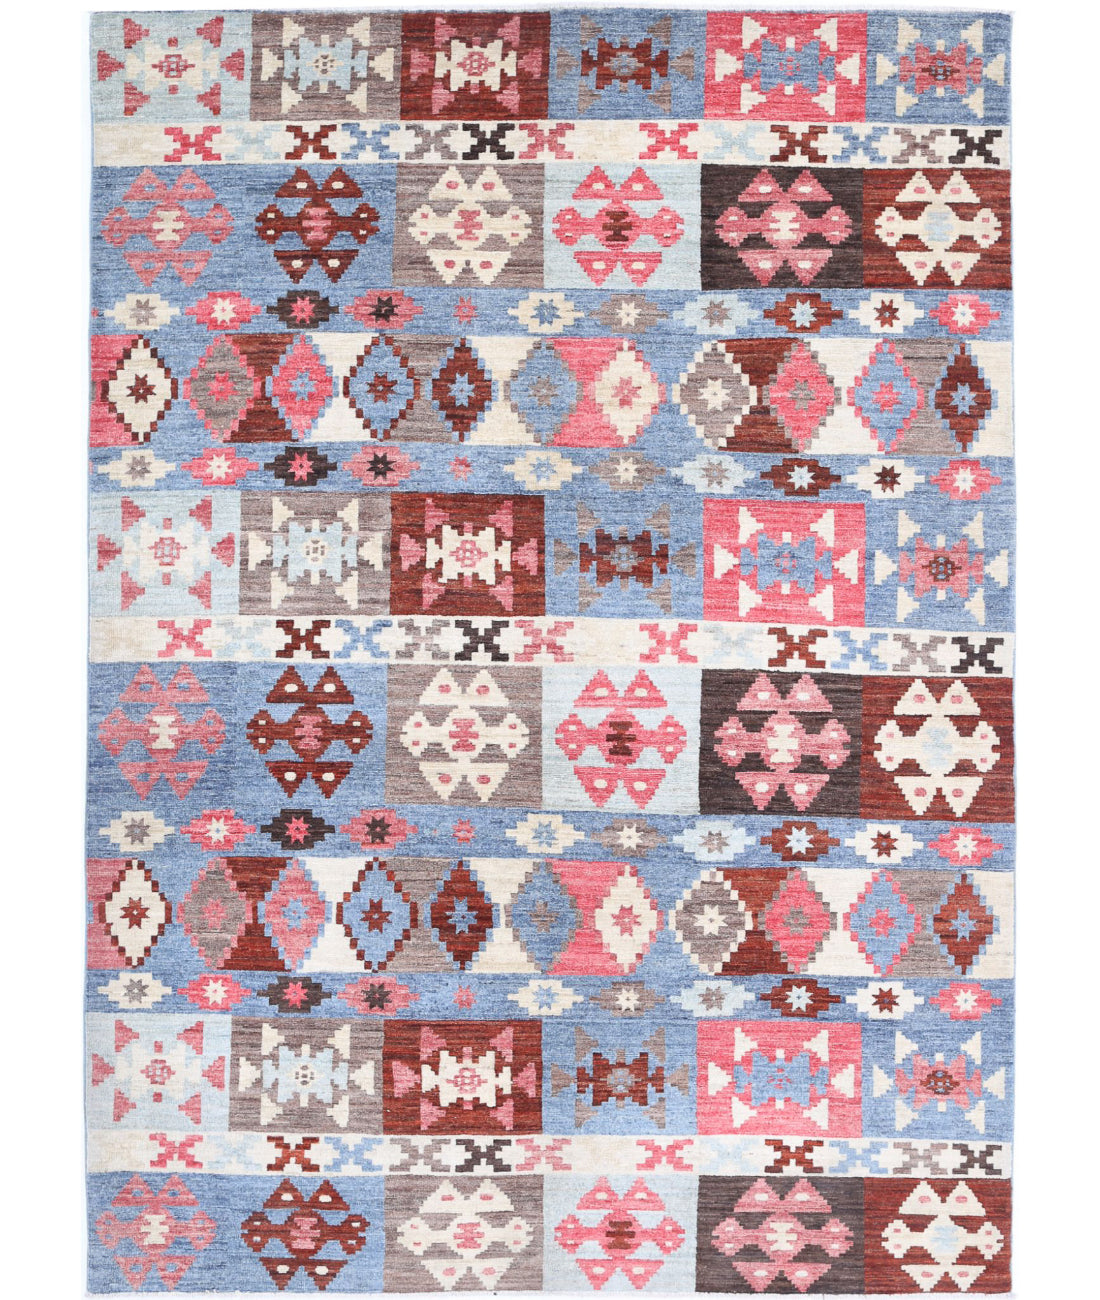 Hand Knotted Modcar Wool Rug - 5'6'' x 7'8'' 5'6'' x 7'8'' (165 X 230) / Multi / Multi